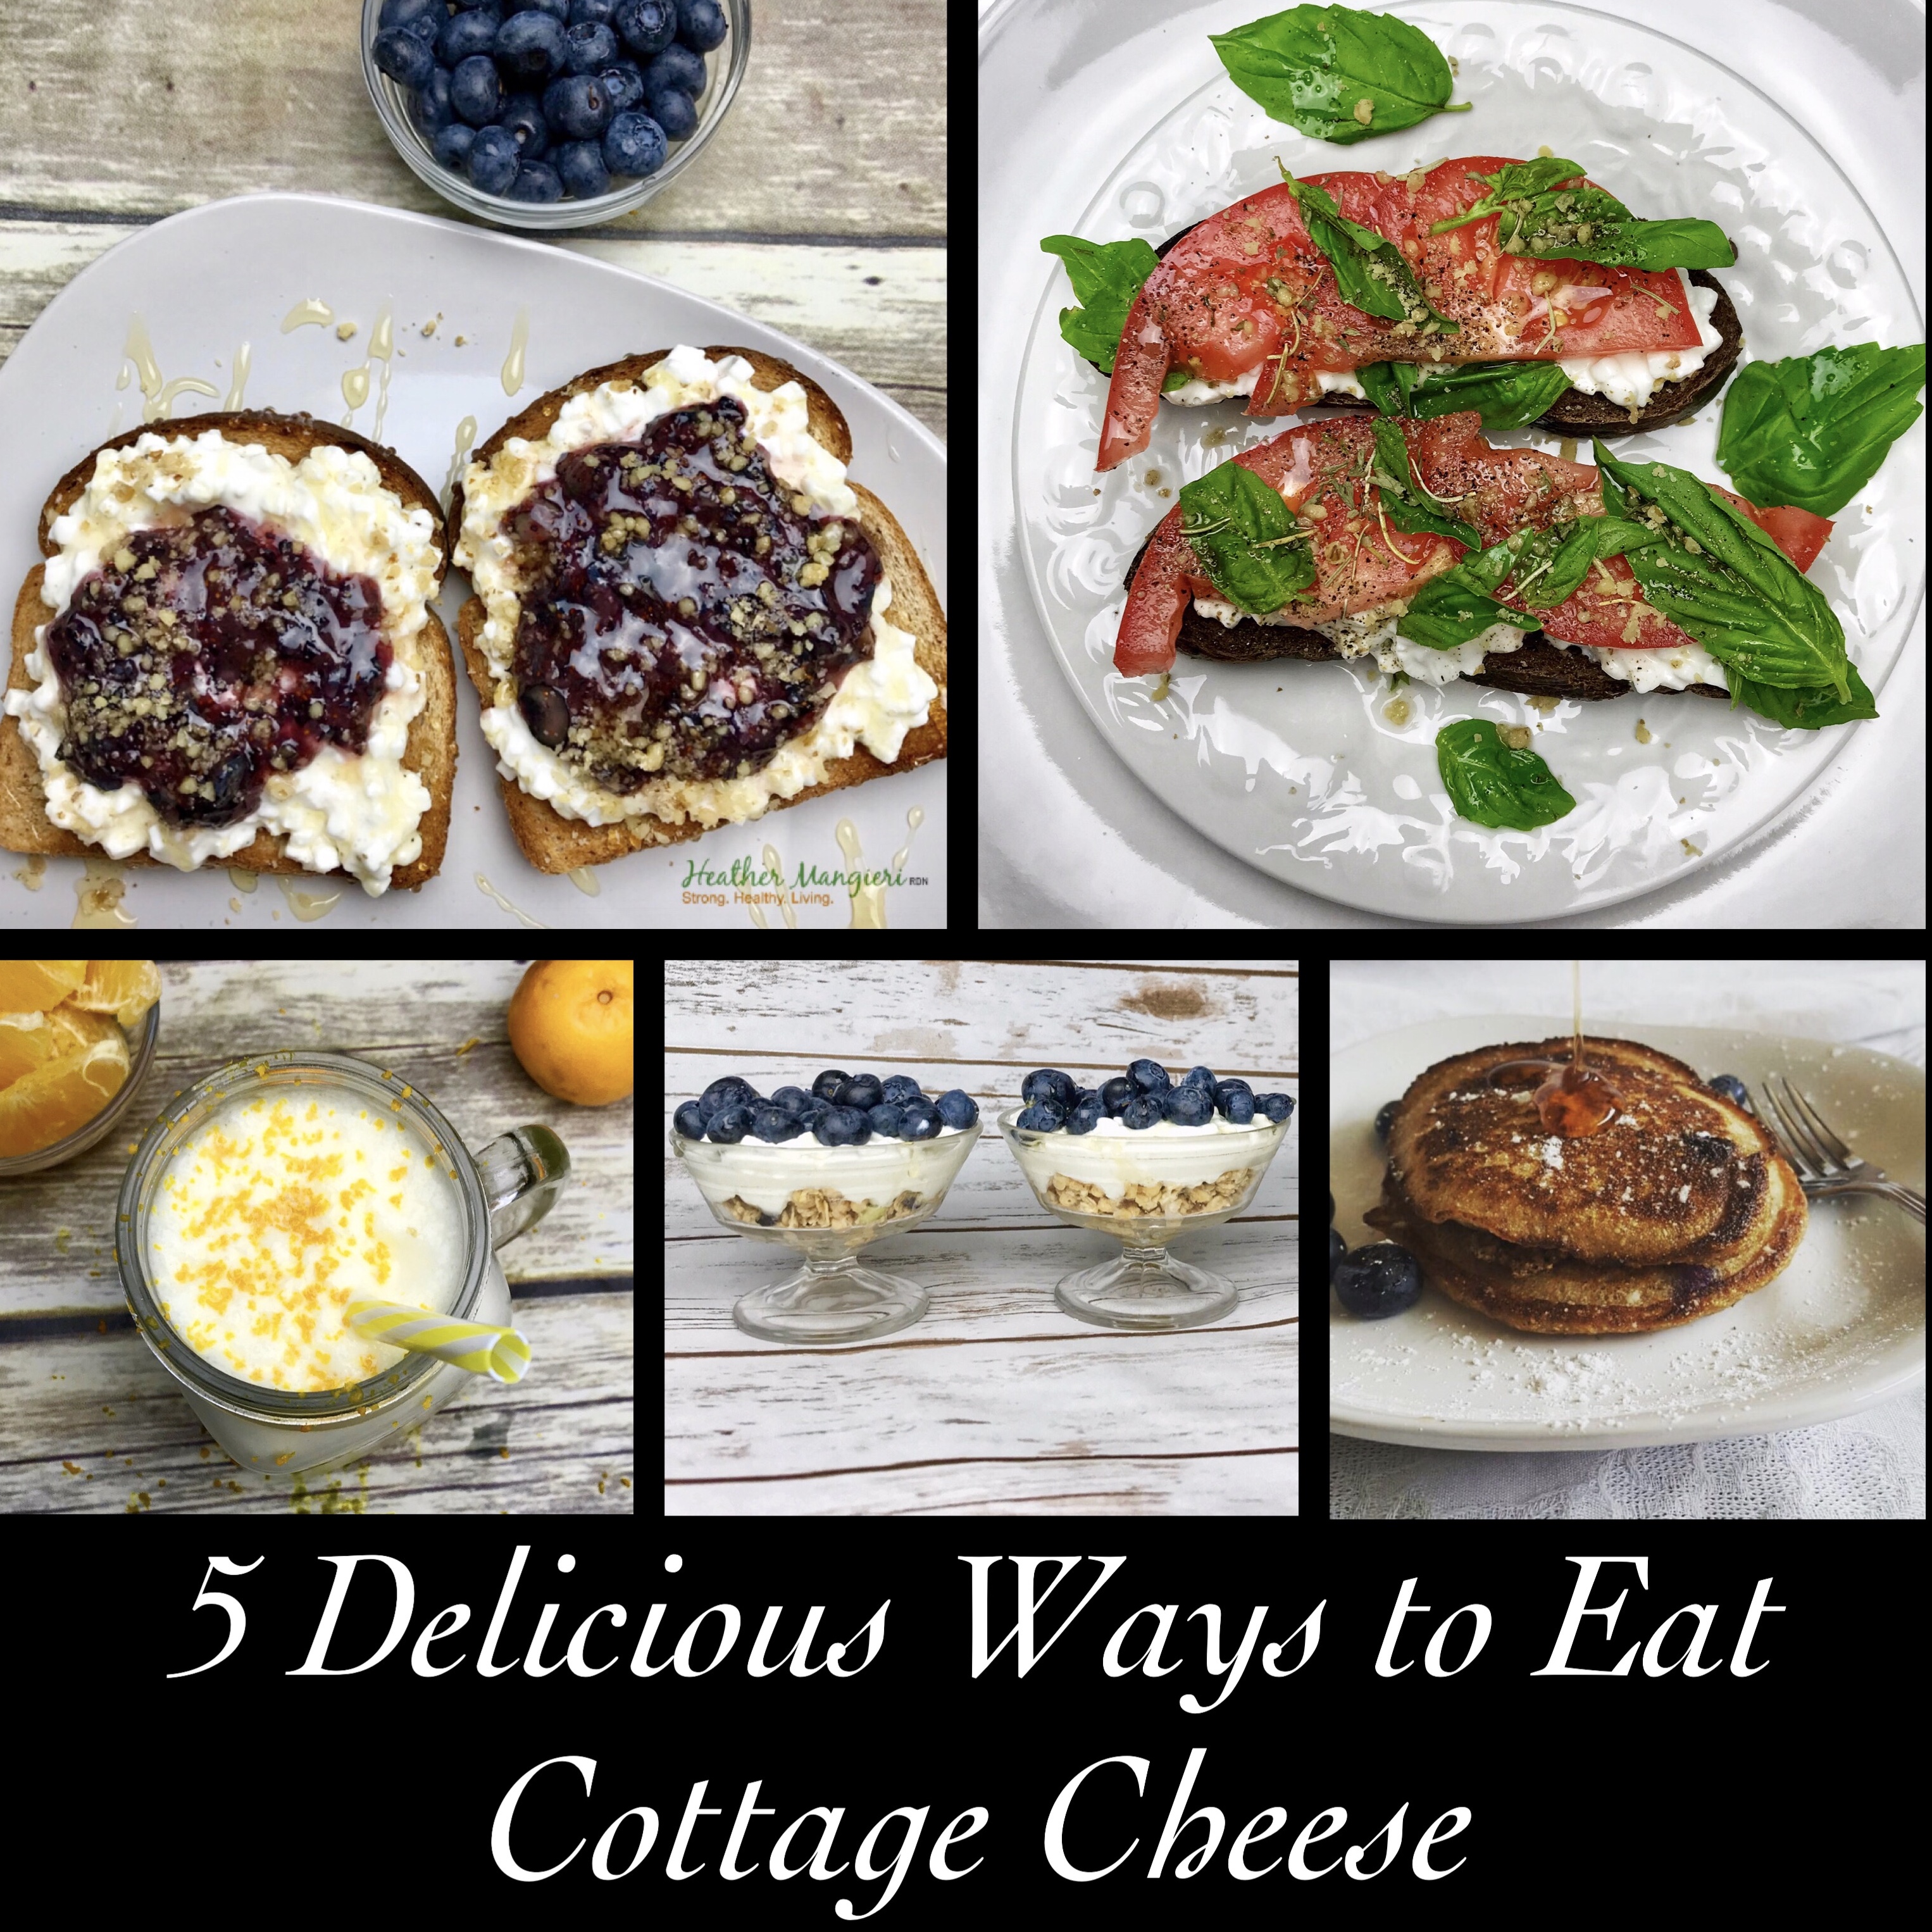 Bought Cottage Cheese? Here Are 3 Tasty Ways to Use It Up